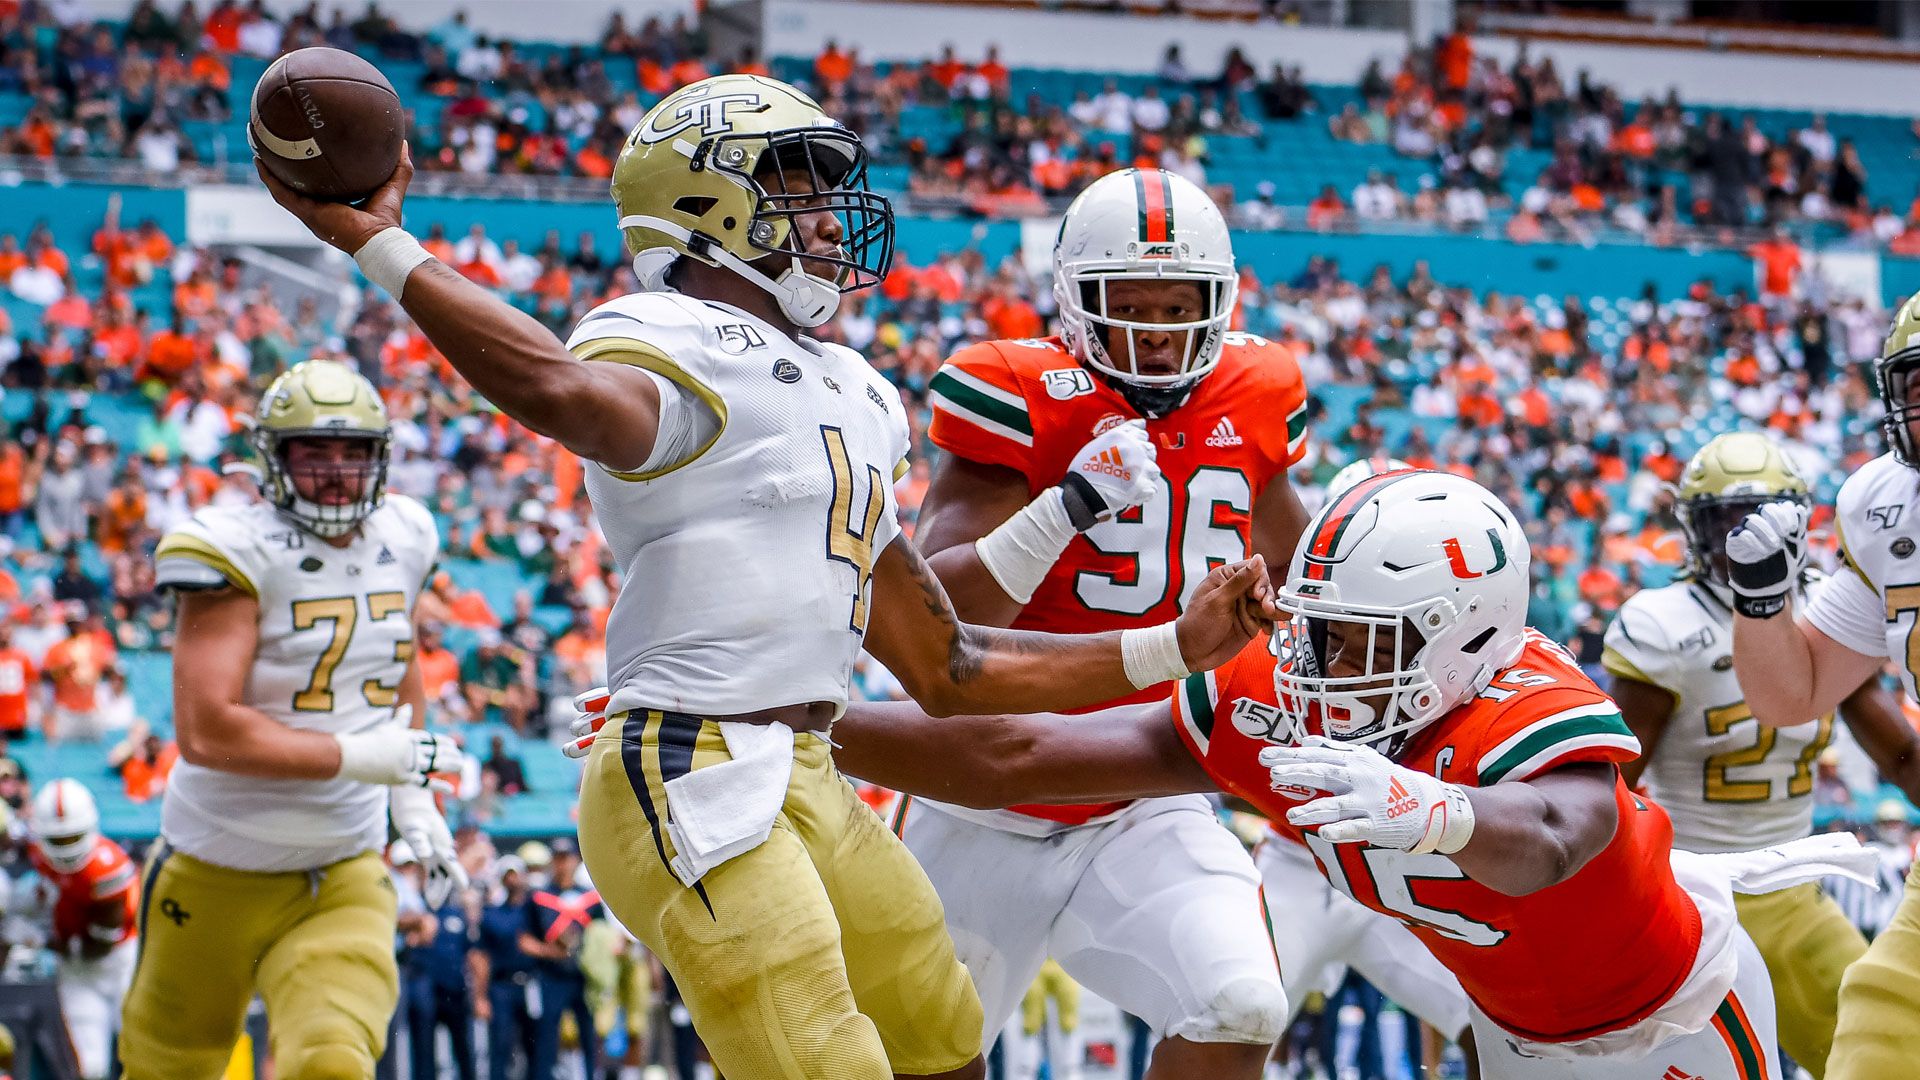 Canes Fall to GT in OT, 28-21